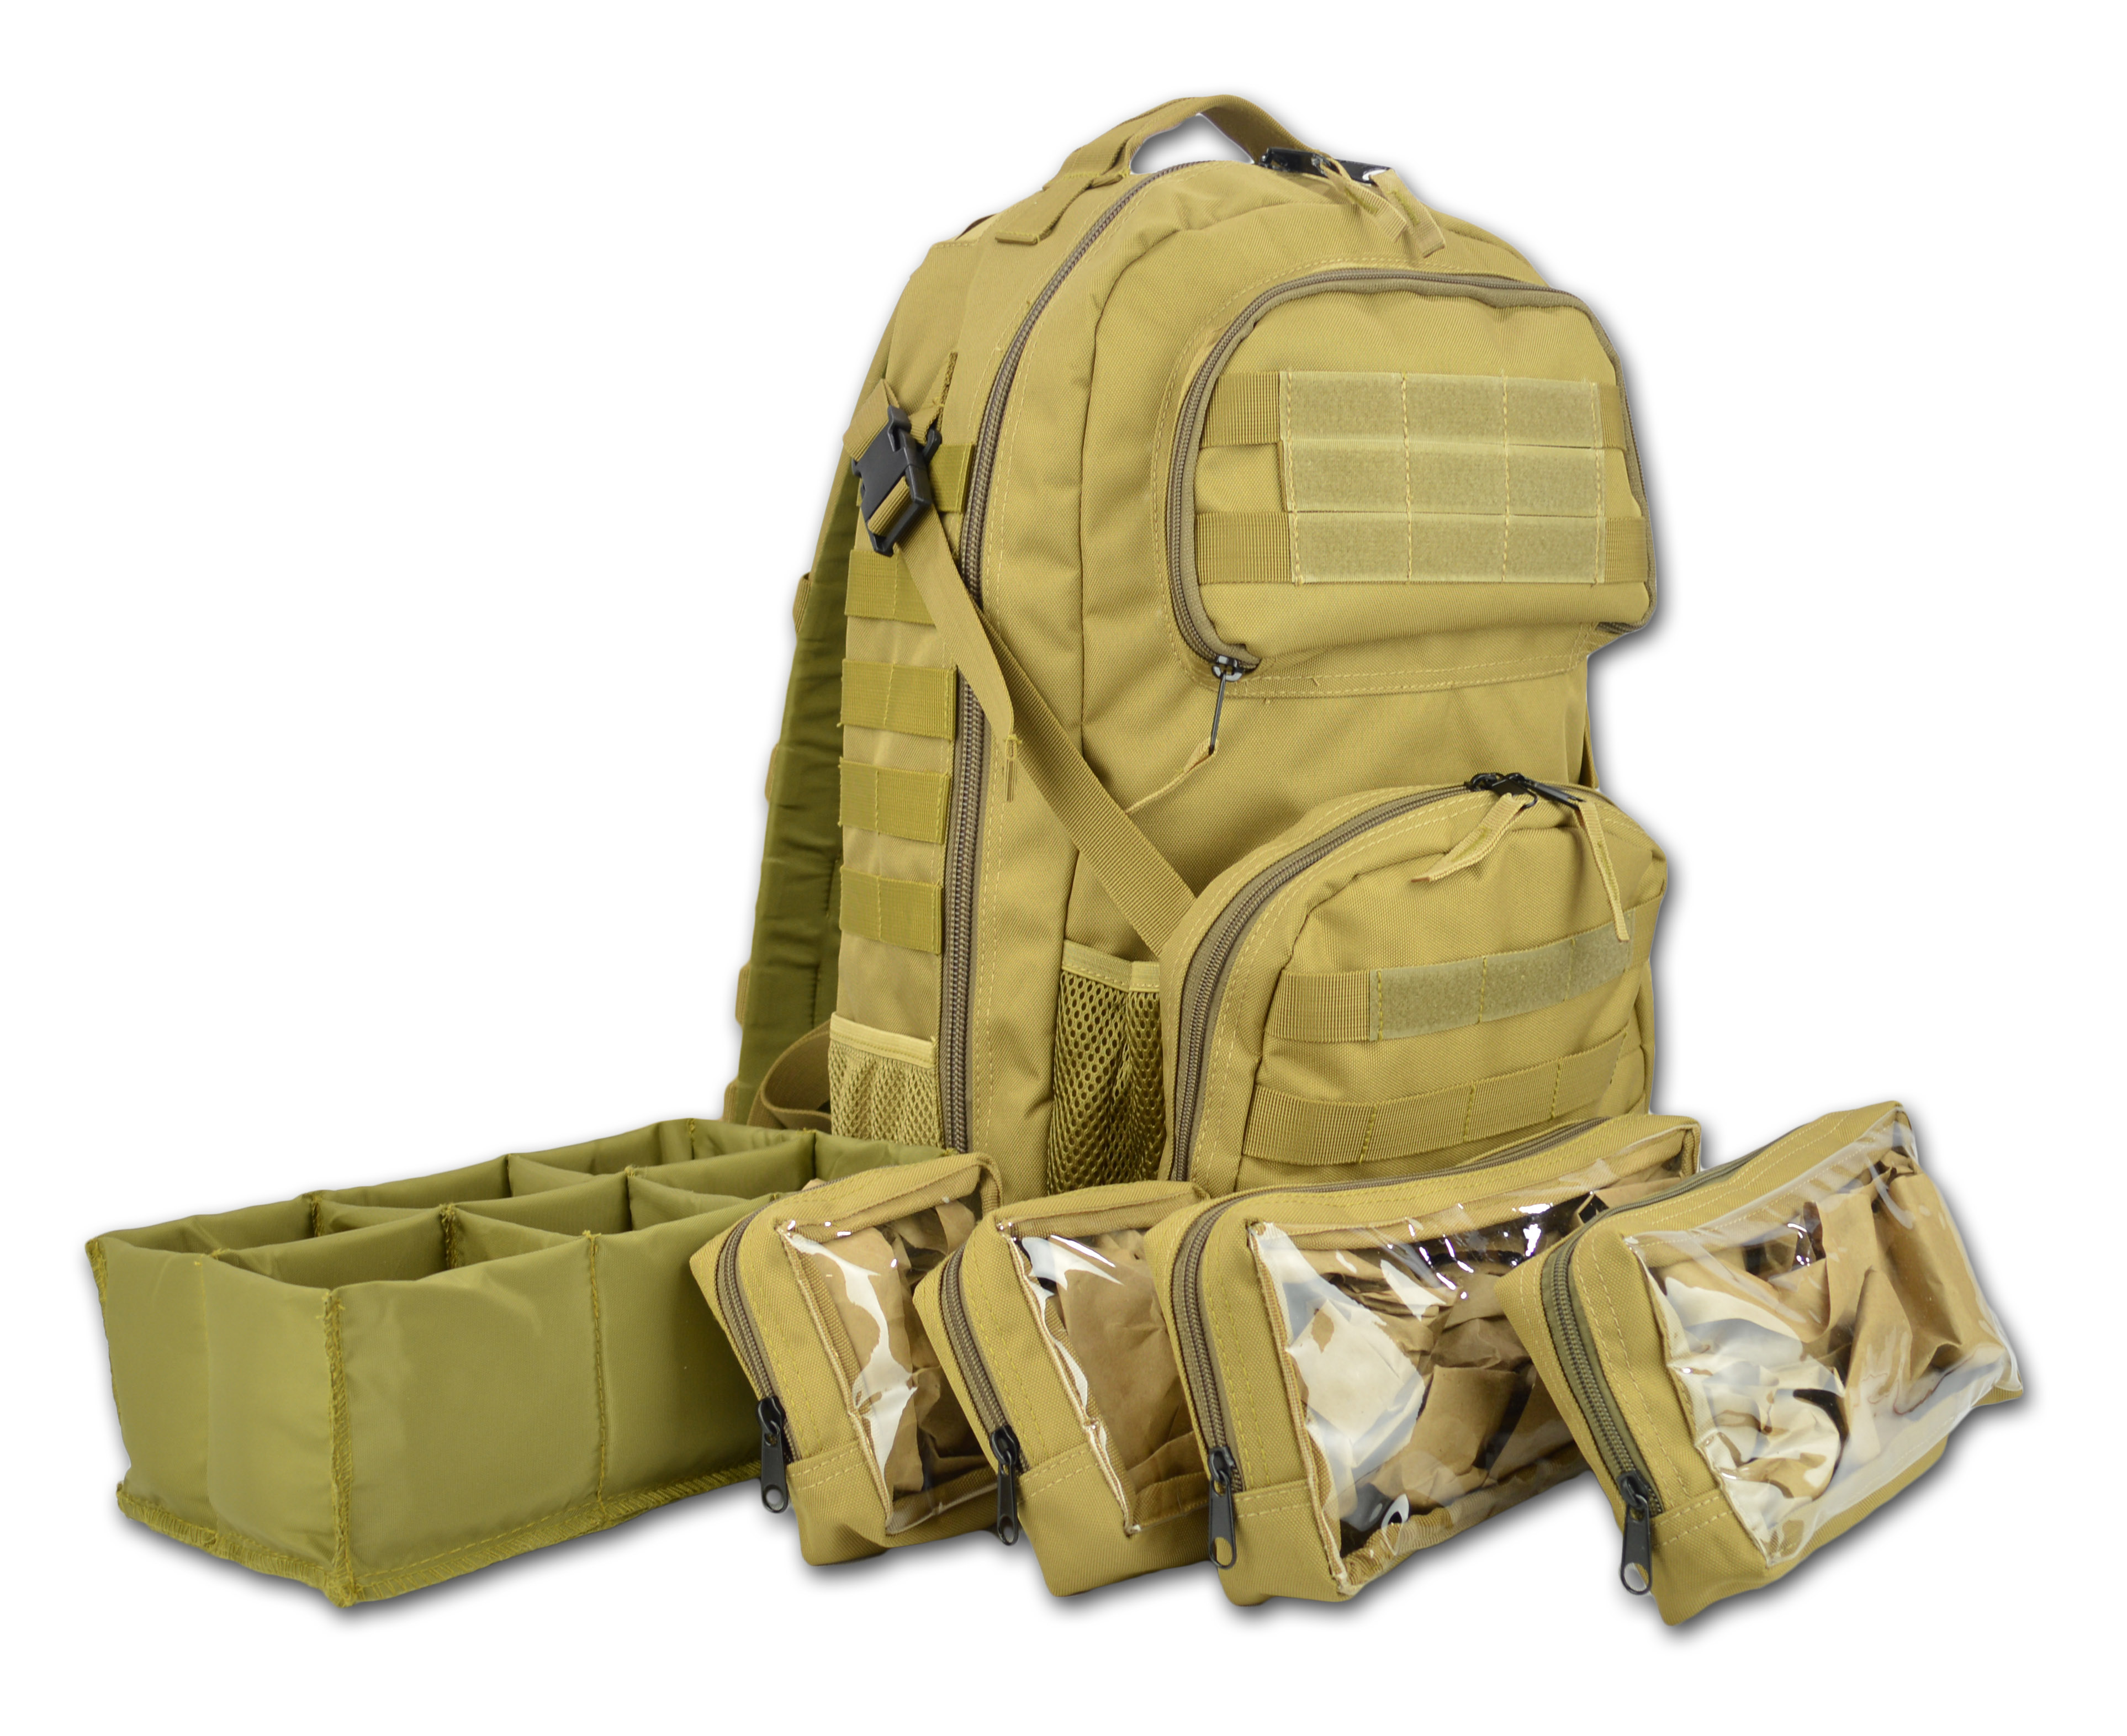 Lightning X Premium Tactical Medic Backpack w/ Modular Pouches & Hydration Port - image 1 of 8